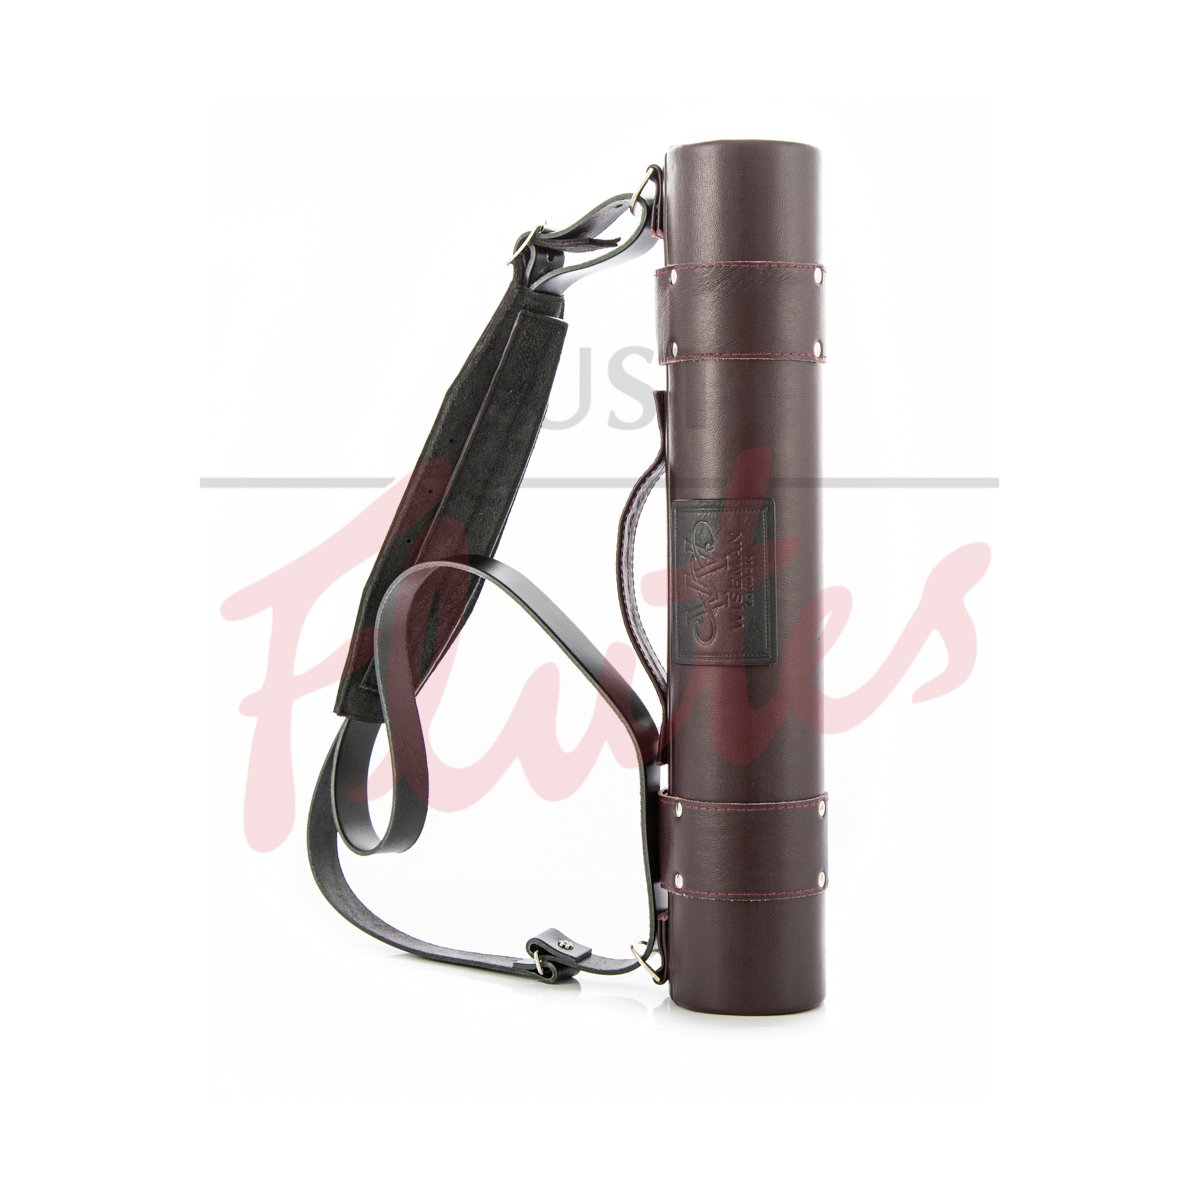 Wiseman Leather Flute and Piccolo Case, Burgundy Laurel Leather with Black and Gold Lining